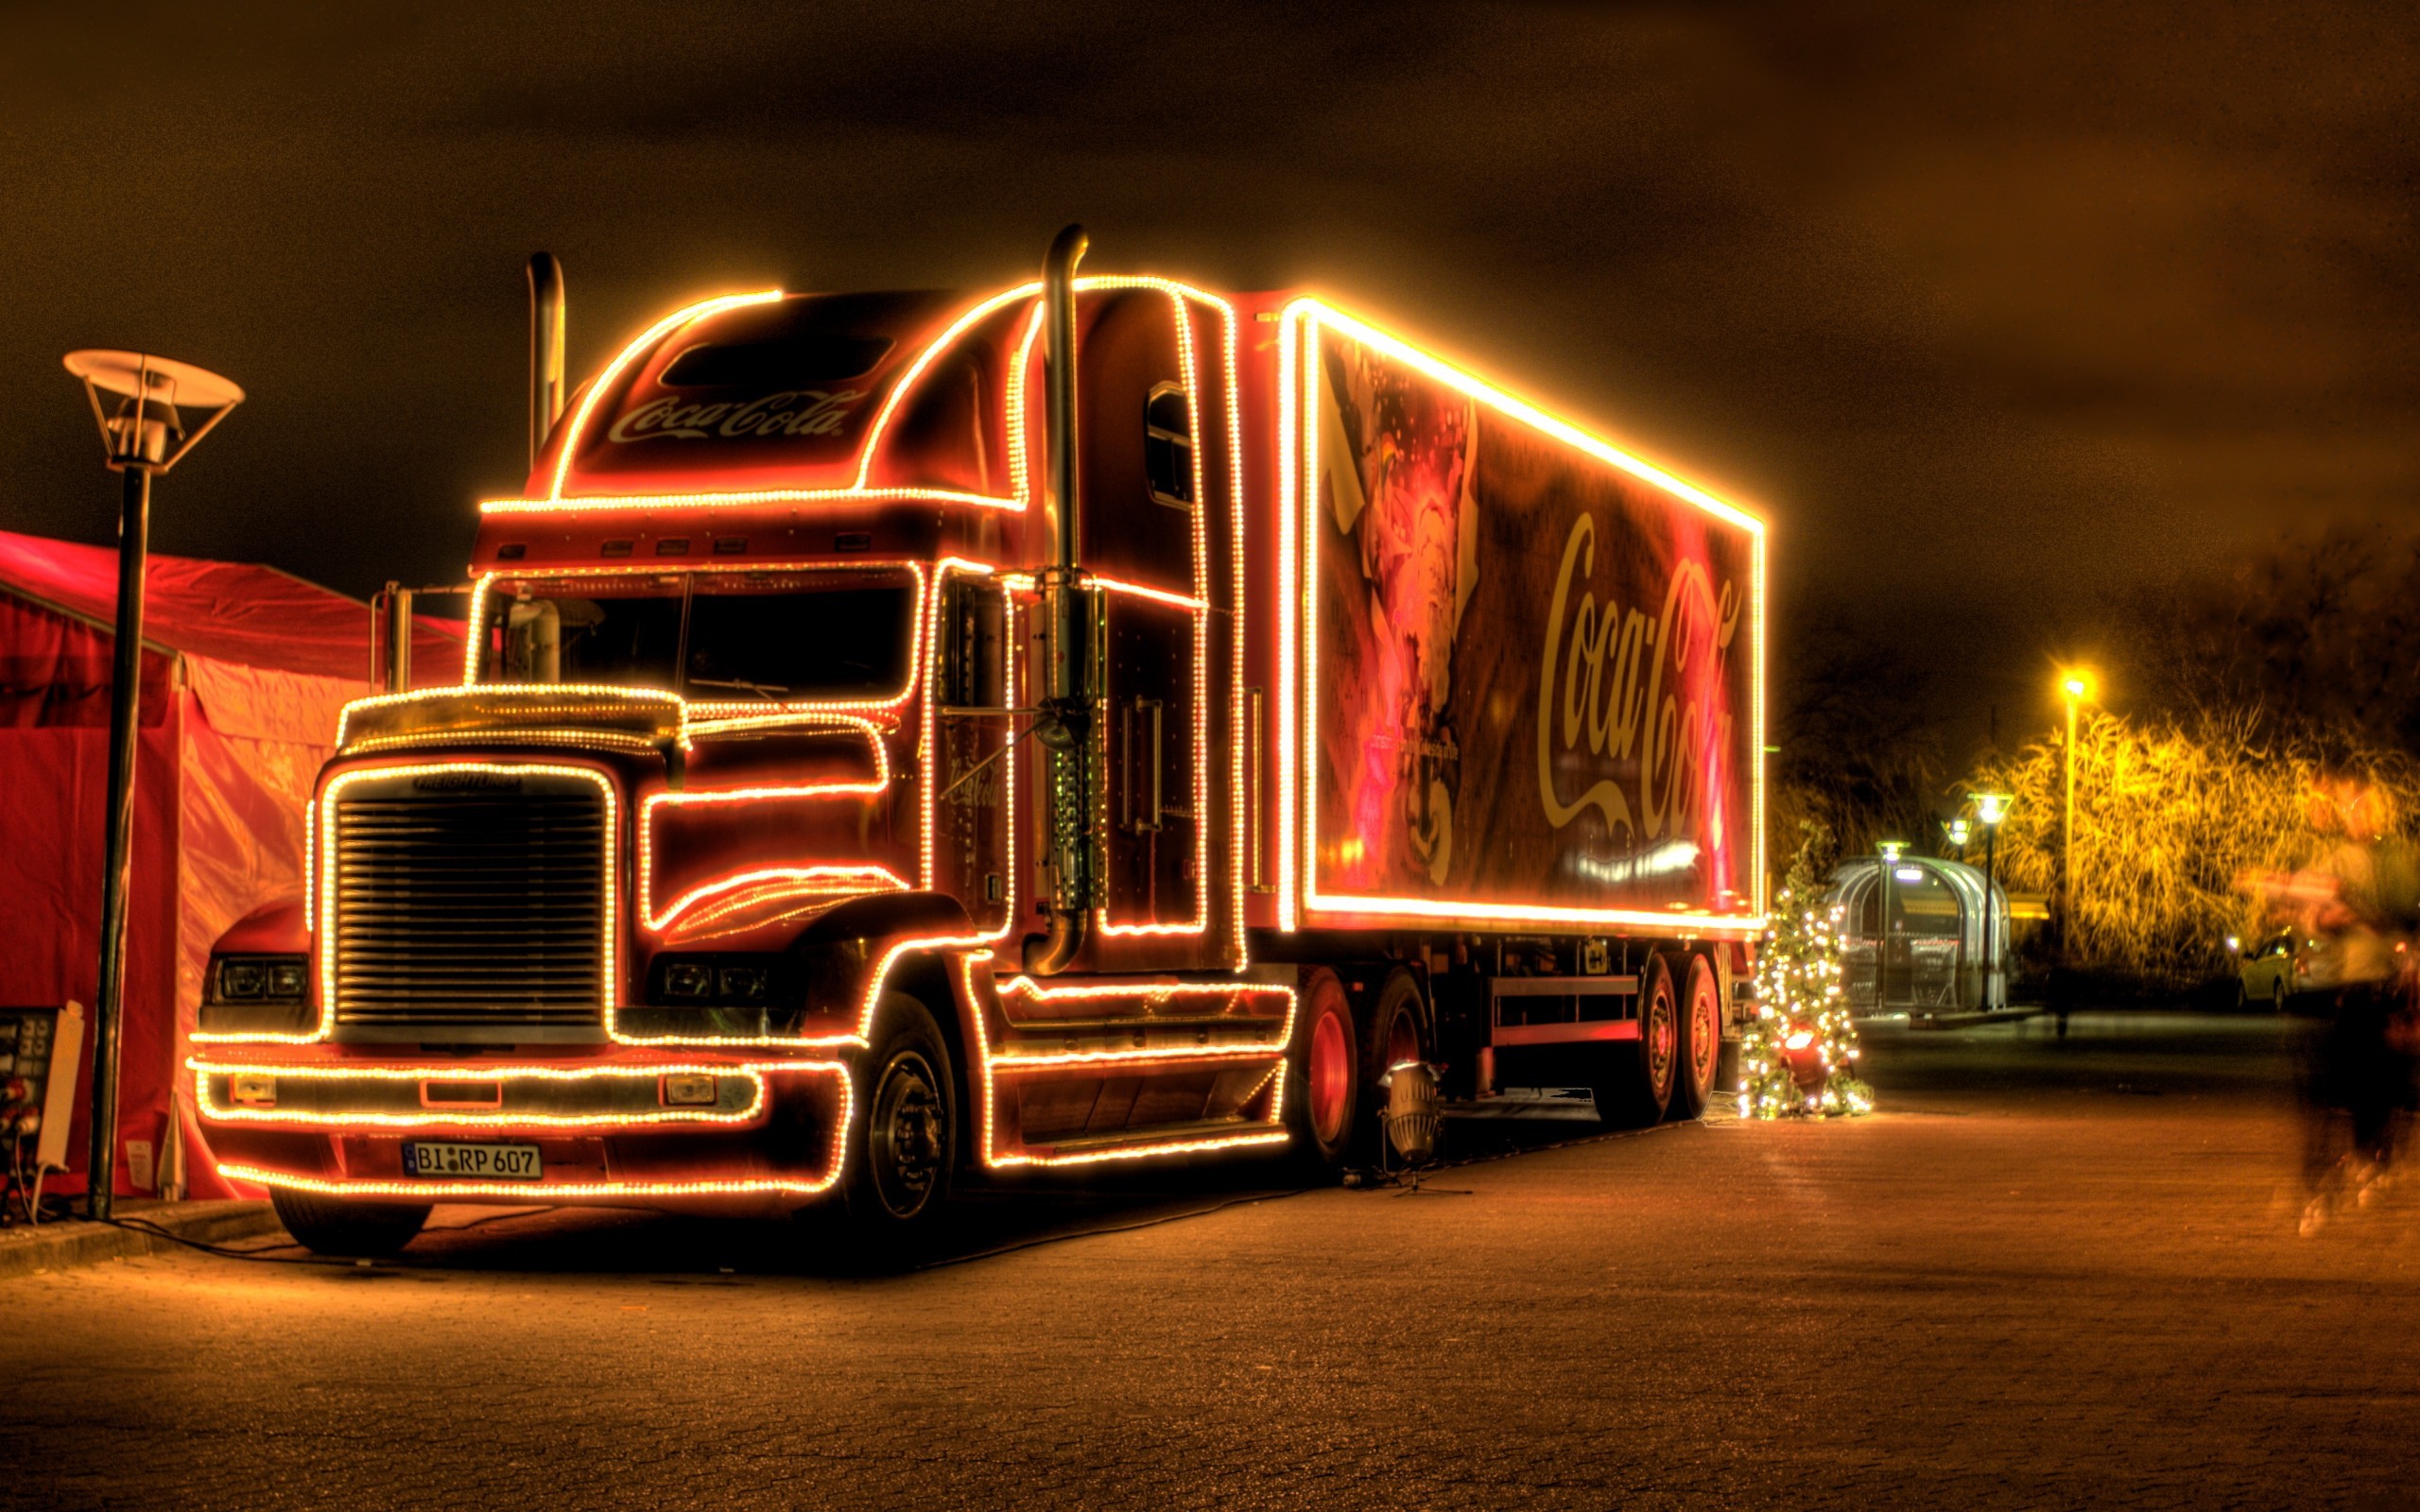 General 2560x1600 New Year truck Christmas holiday vehicle Coca-Cola advertisements